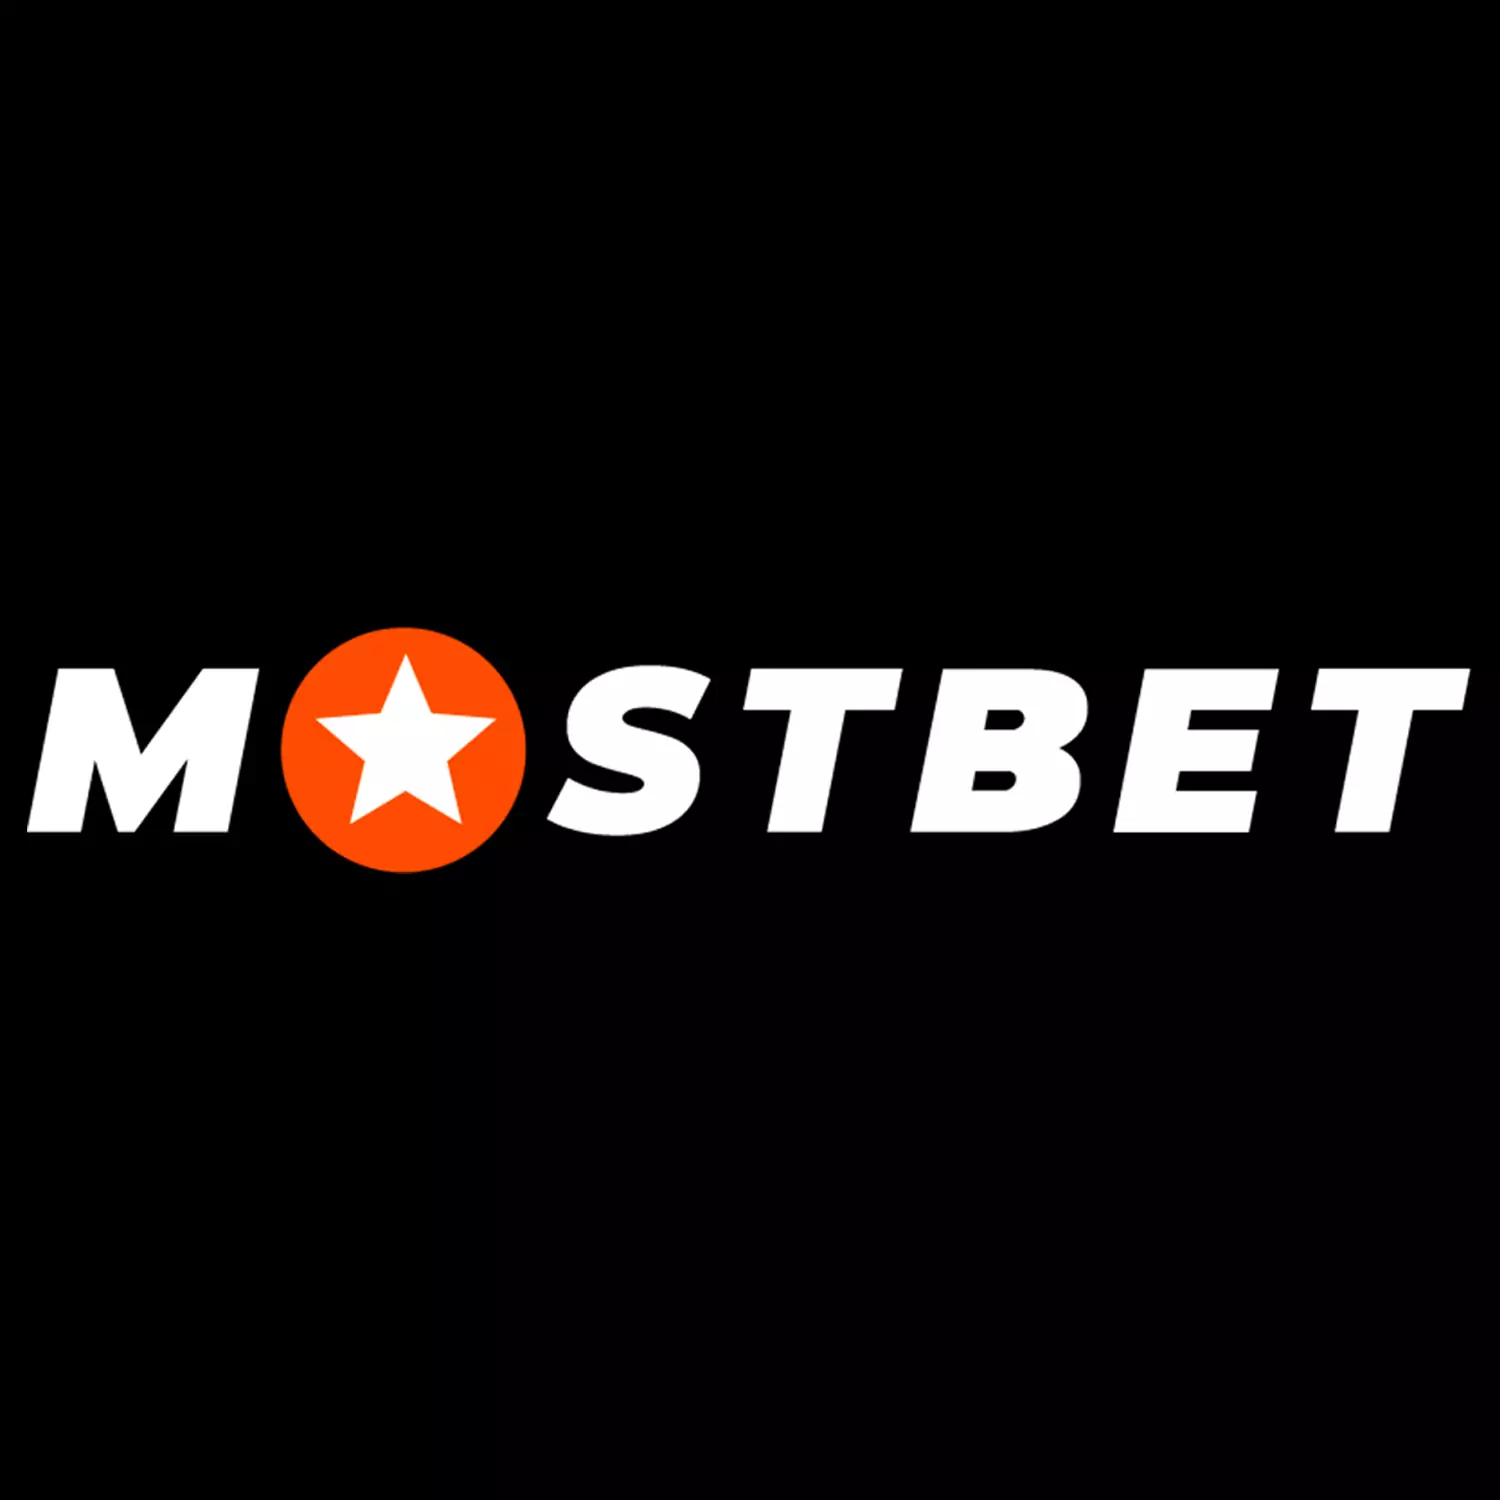 Watch our in-depth video review of Mostbet for Indian users.